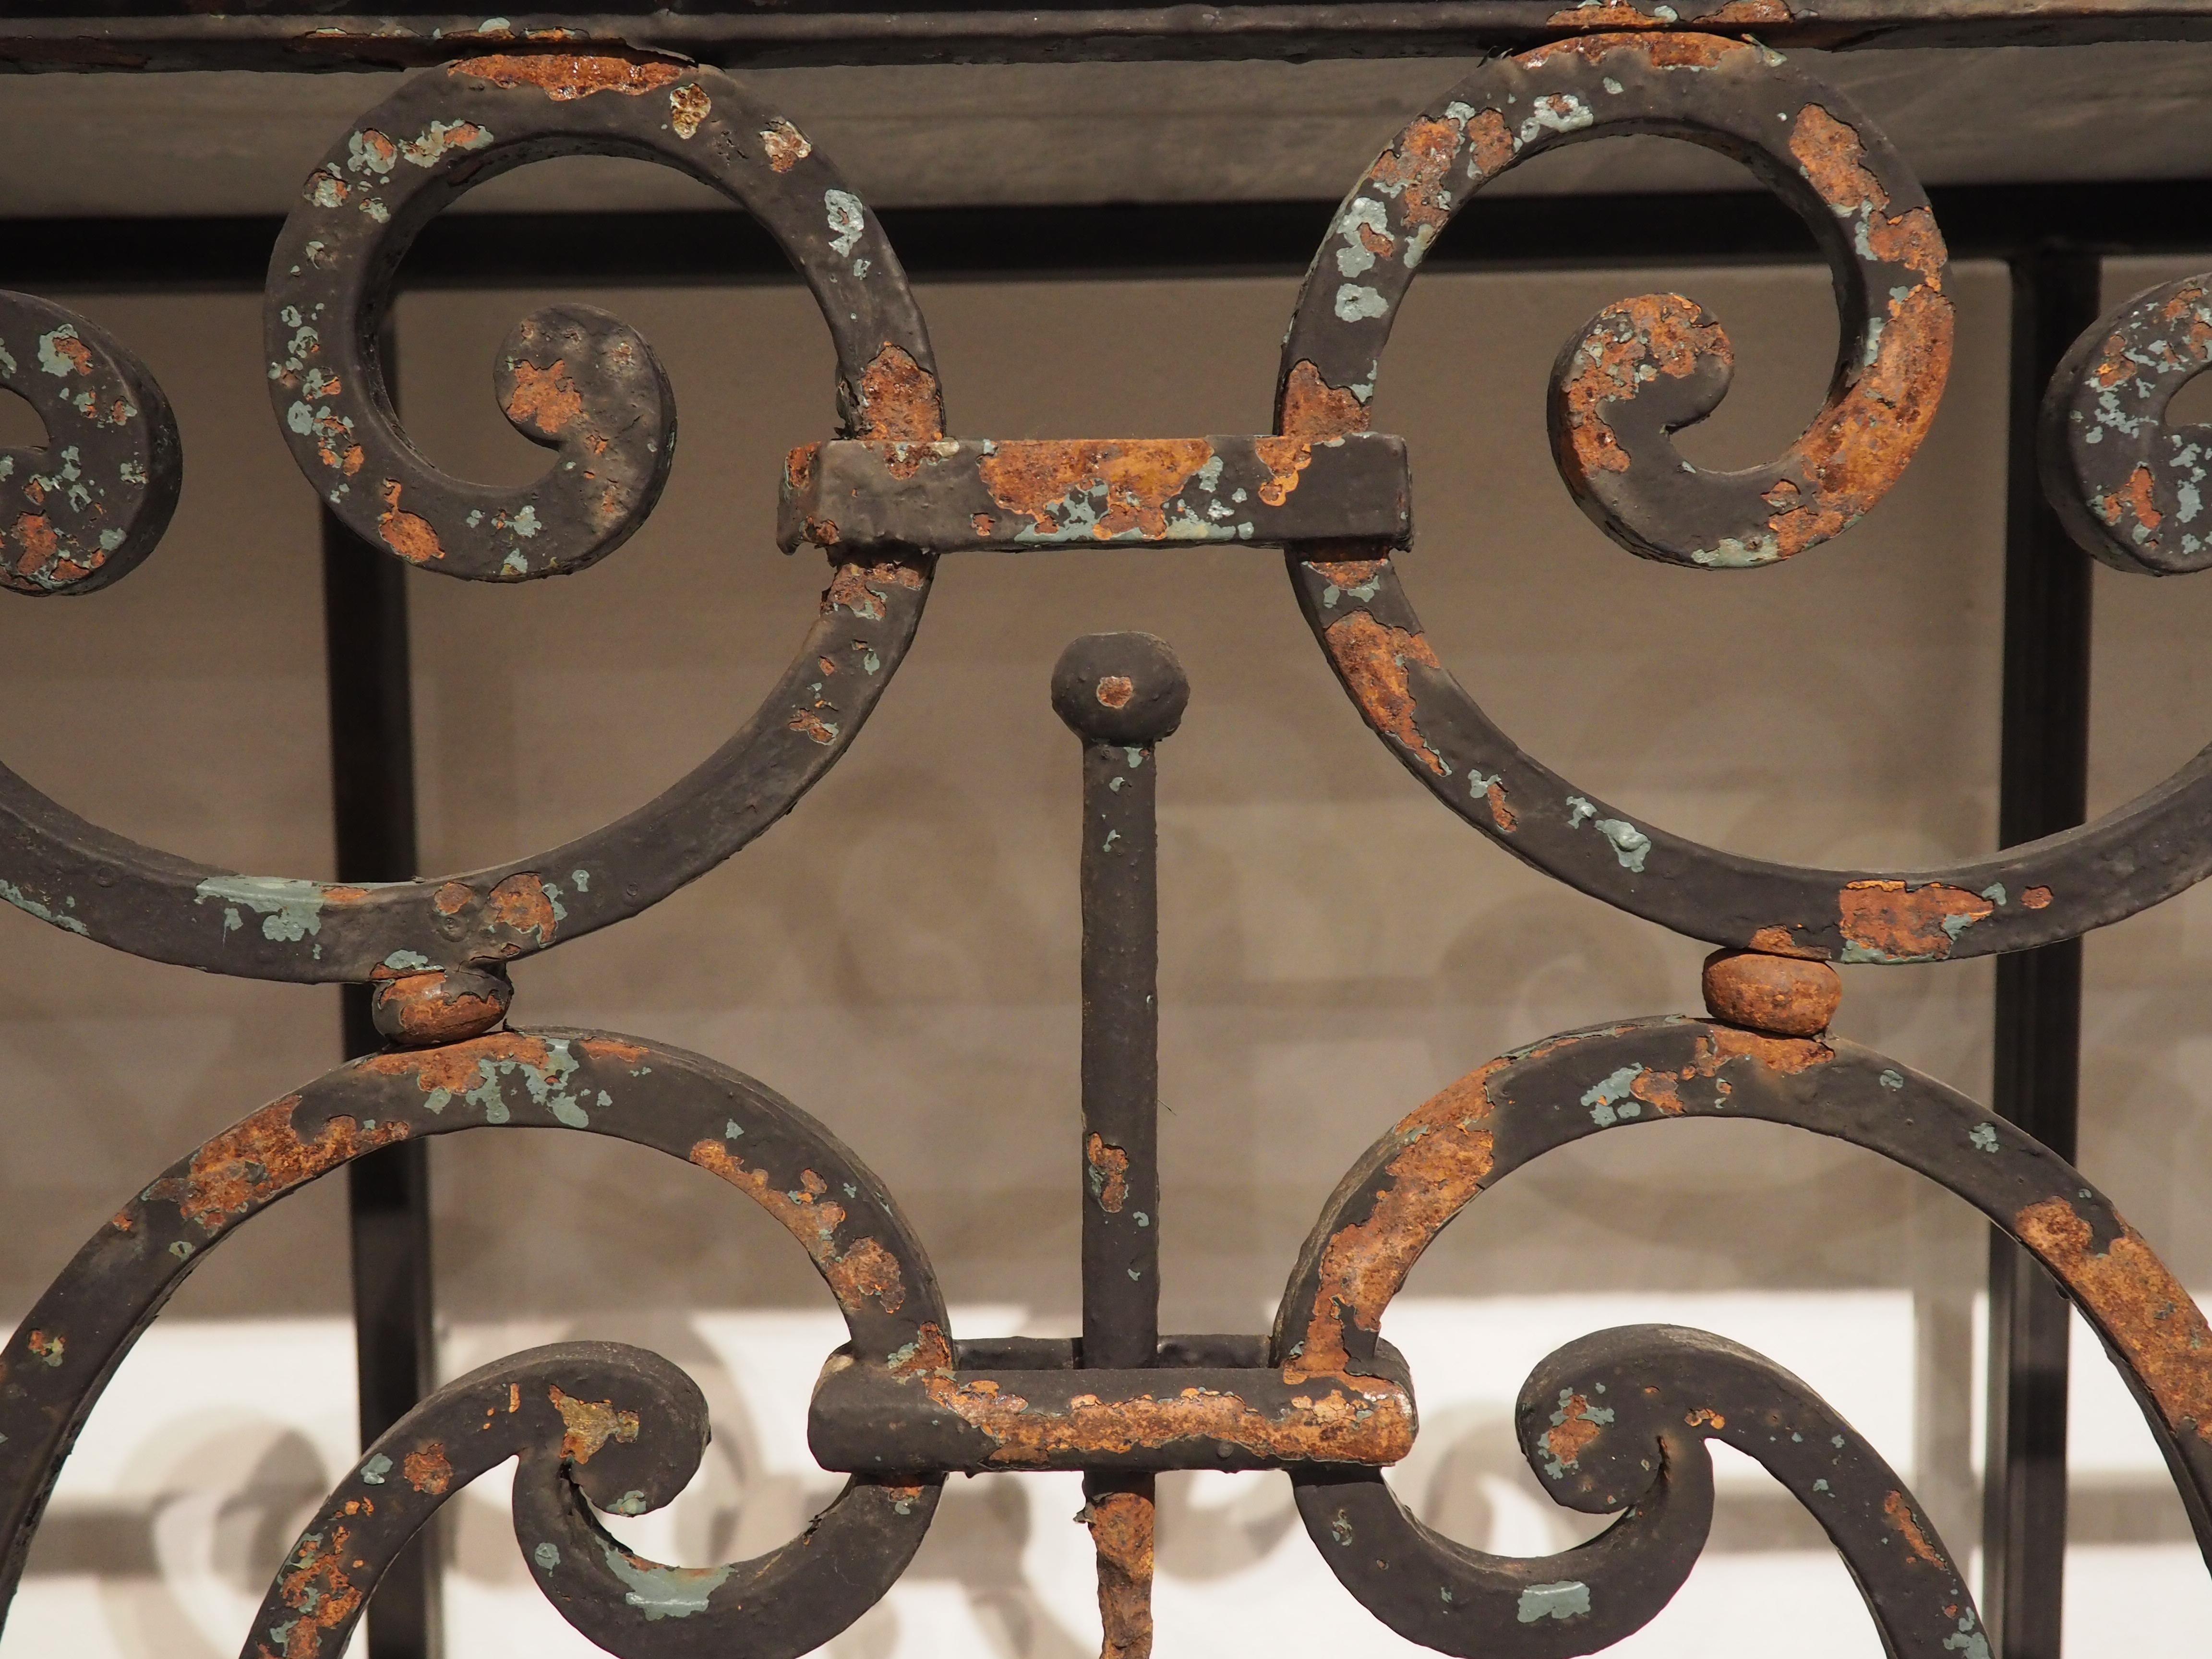 Hand-Carved 19th Century French Iron Balcony Gate Console Table with Belgian Bluestone